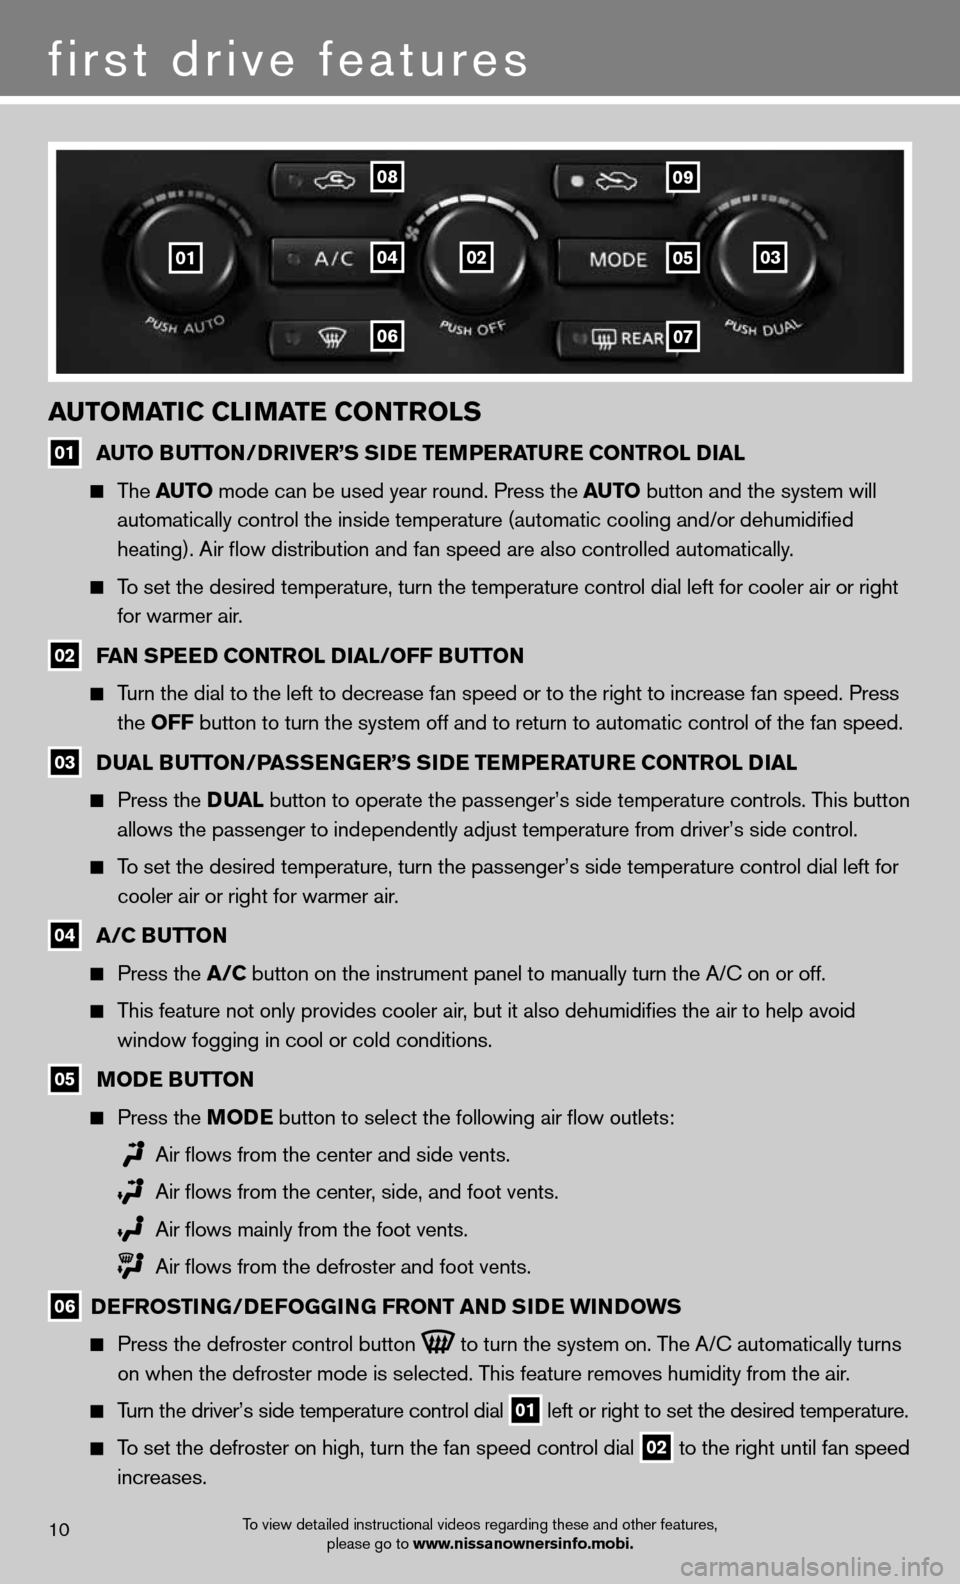 NISSAN GT-R 2013 R35 Quick Reference Guide first drive features
auToMa Tic cli MaTe coNTrolS
01  auT
o BuTT oN/D river’S S iD e Te MPera Ture coNTrol D ial
  
 The  auTo  mode can be used year round. Press the au To  button and the system wi